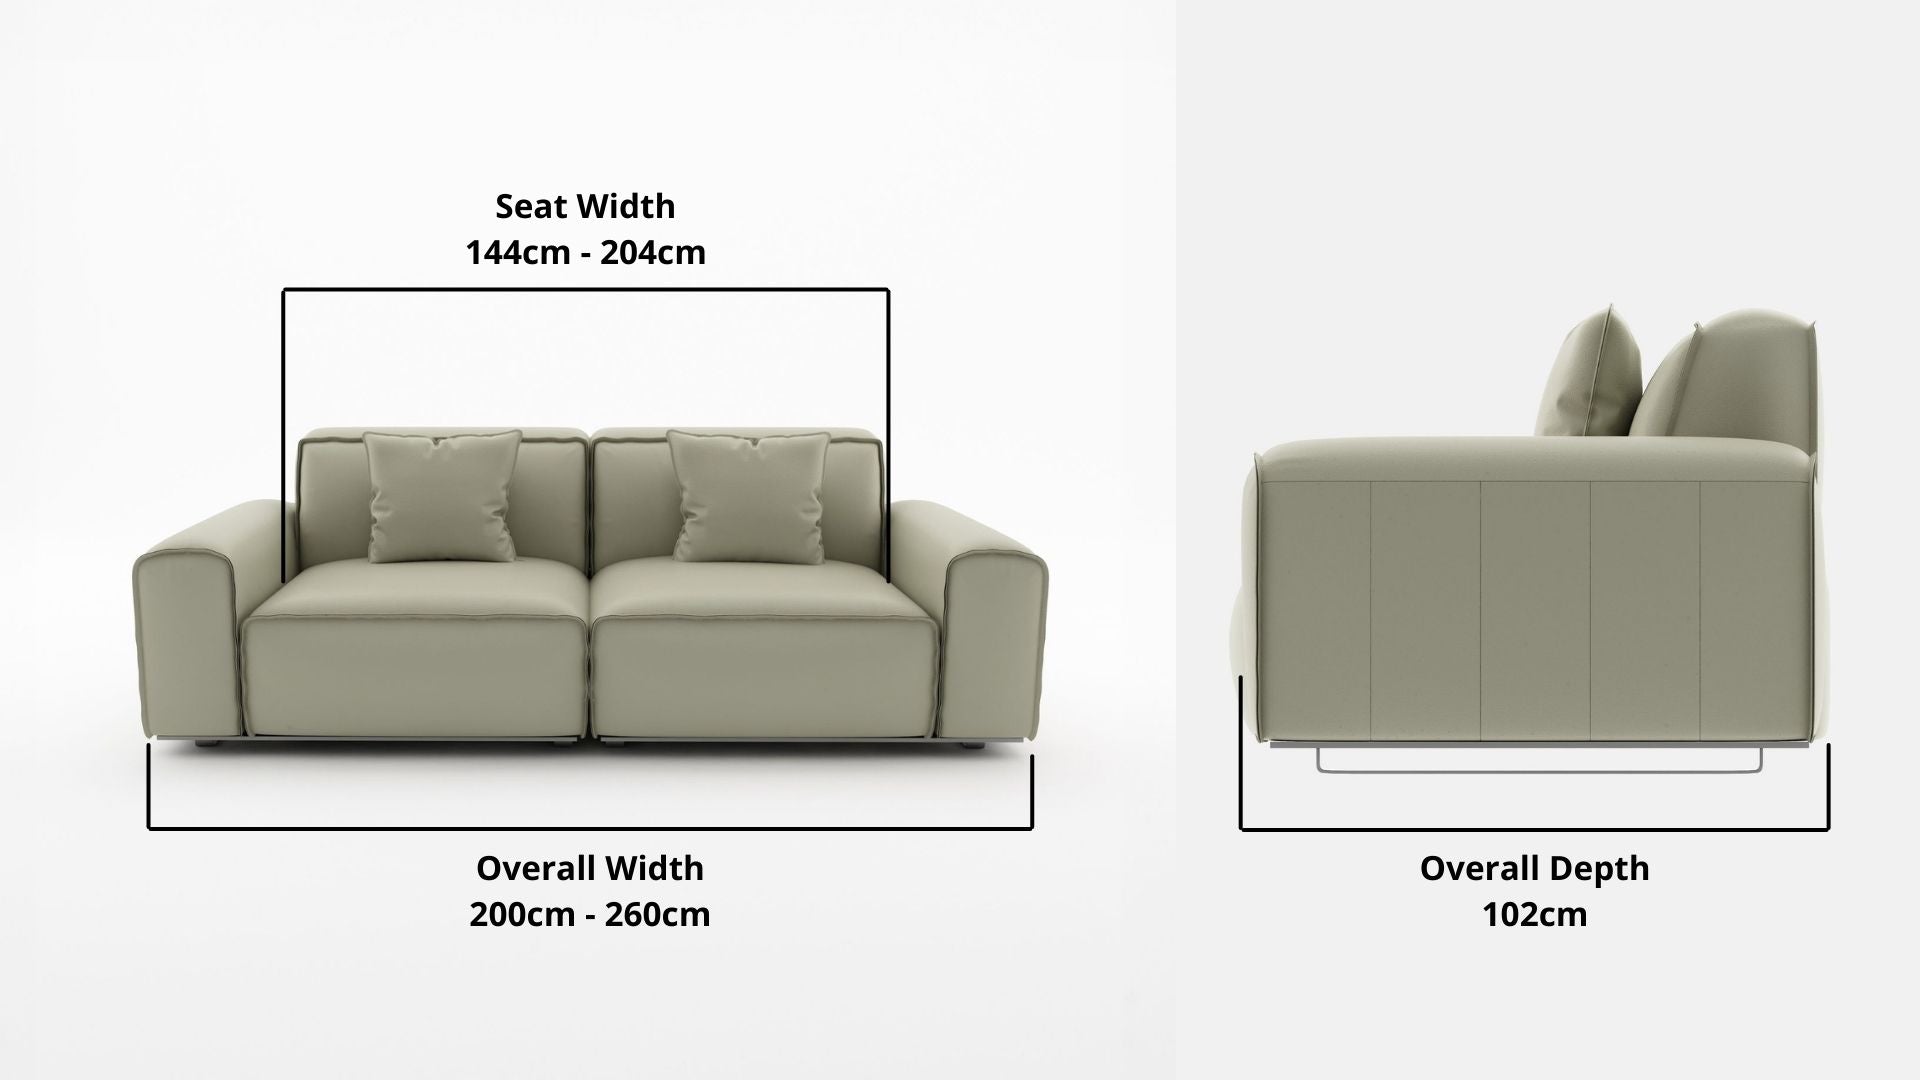 Details the key dimensions in terms of overall width, overall depth and seat width for Colby Half Leather Sofa